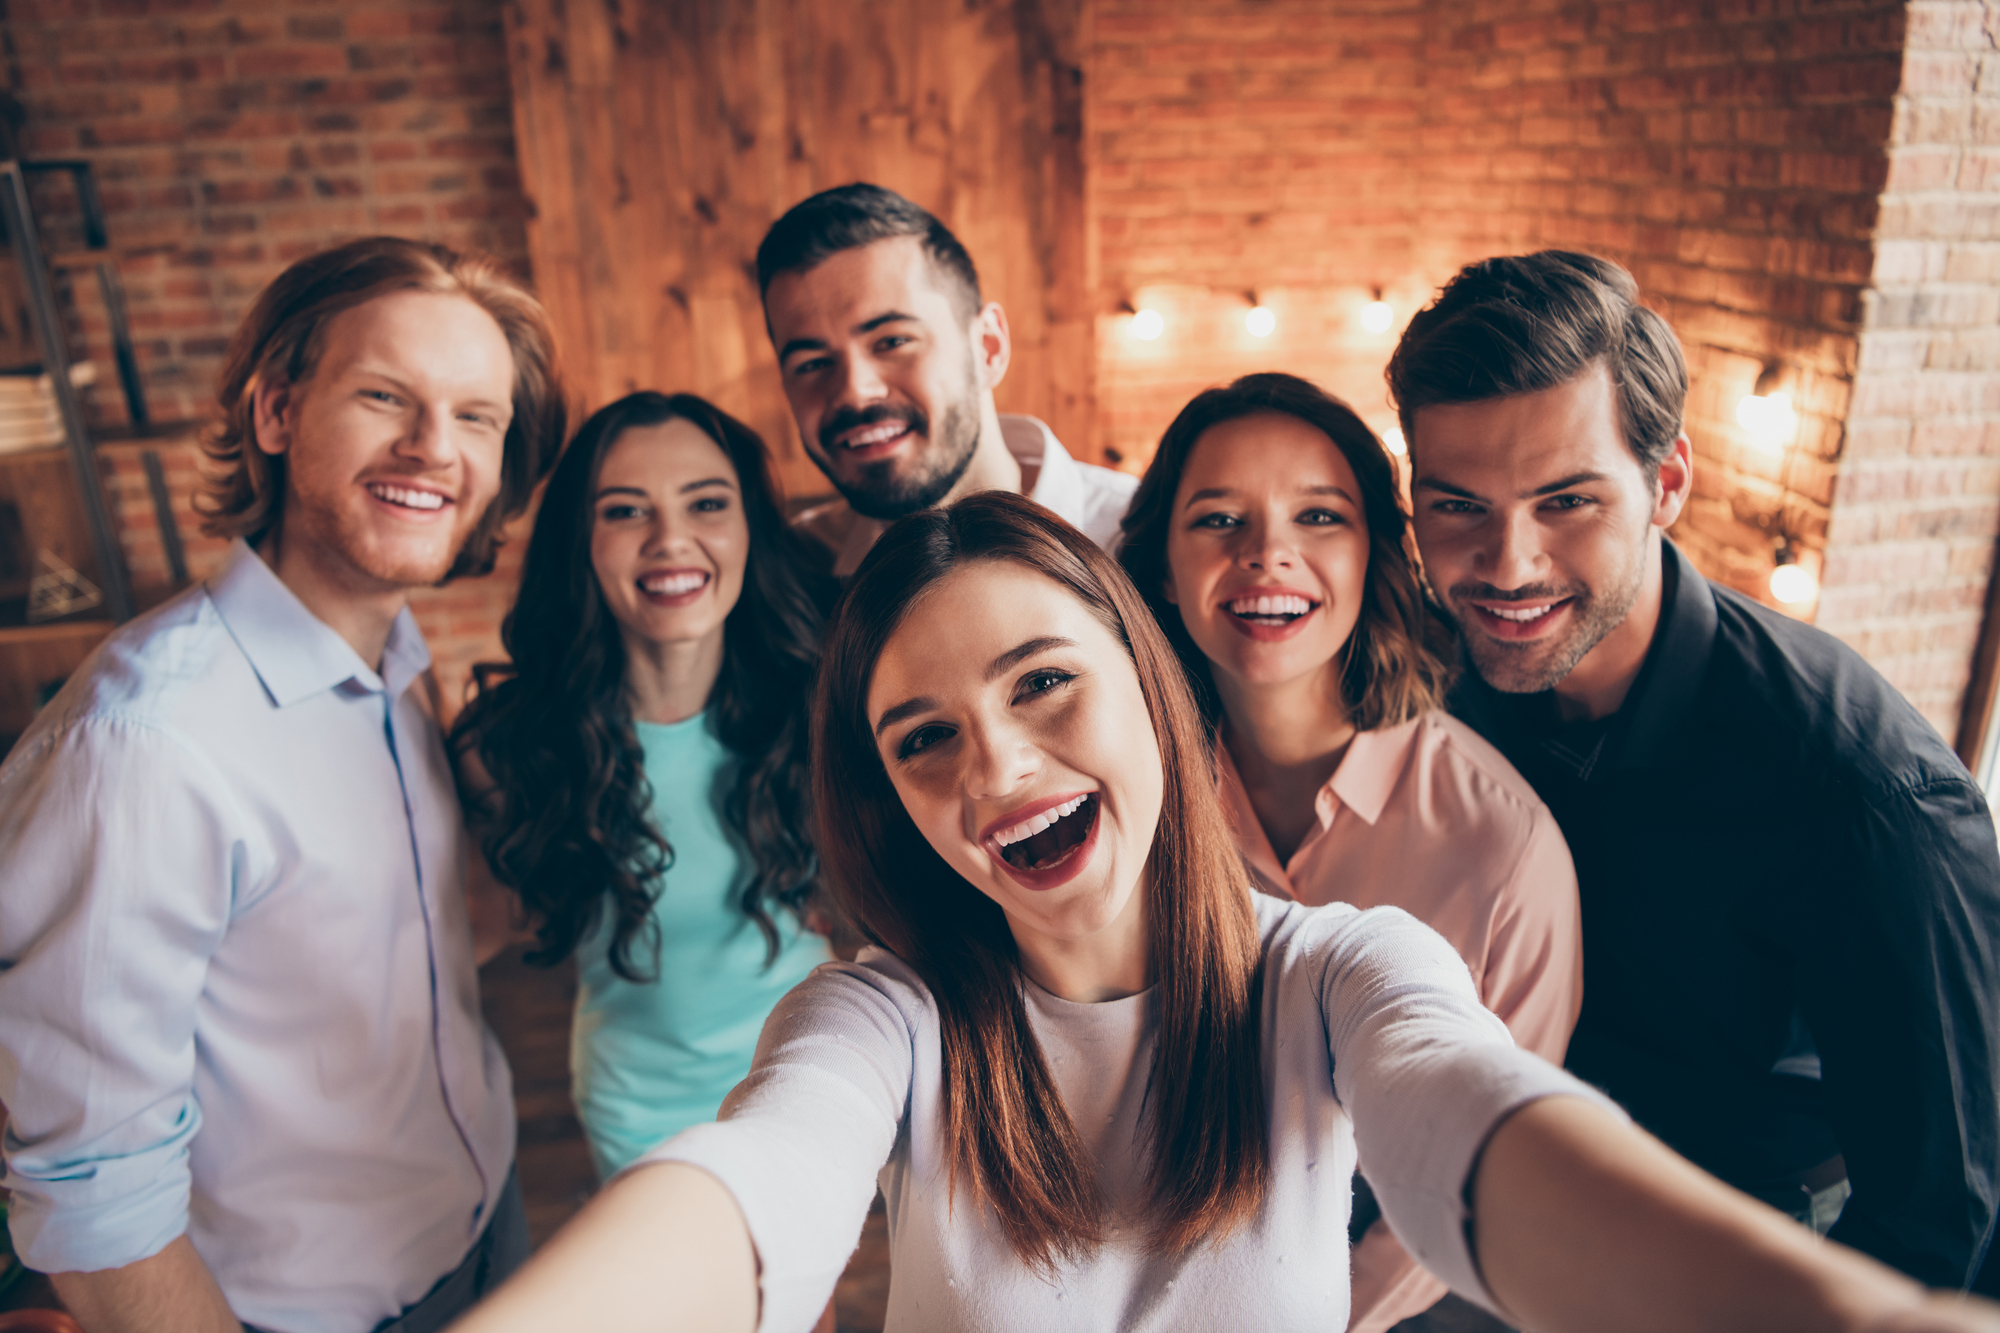 Self-portrait of nice attractive lovely charming winsome cheerful cheery glad ecstatic positive ladies gentlemen having fun embracing house event dream in industrial loft interior room indoors.